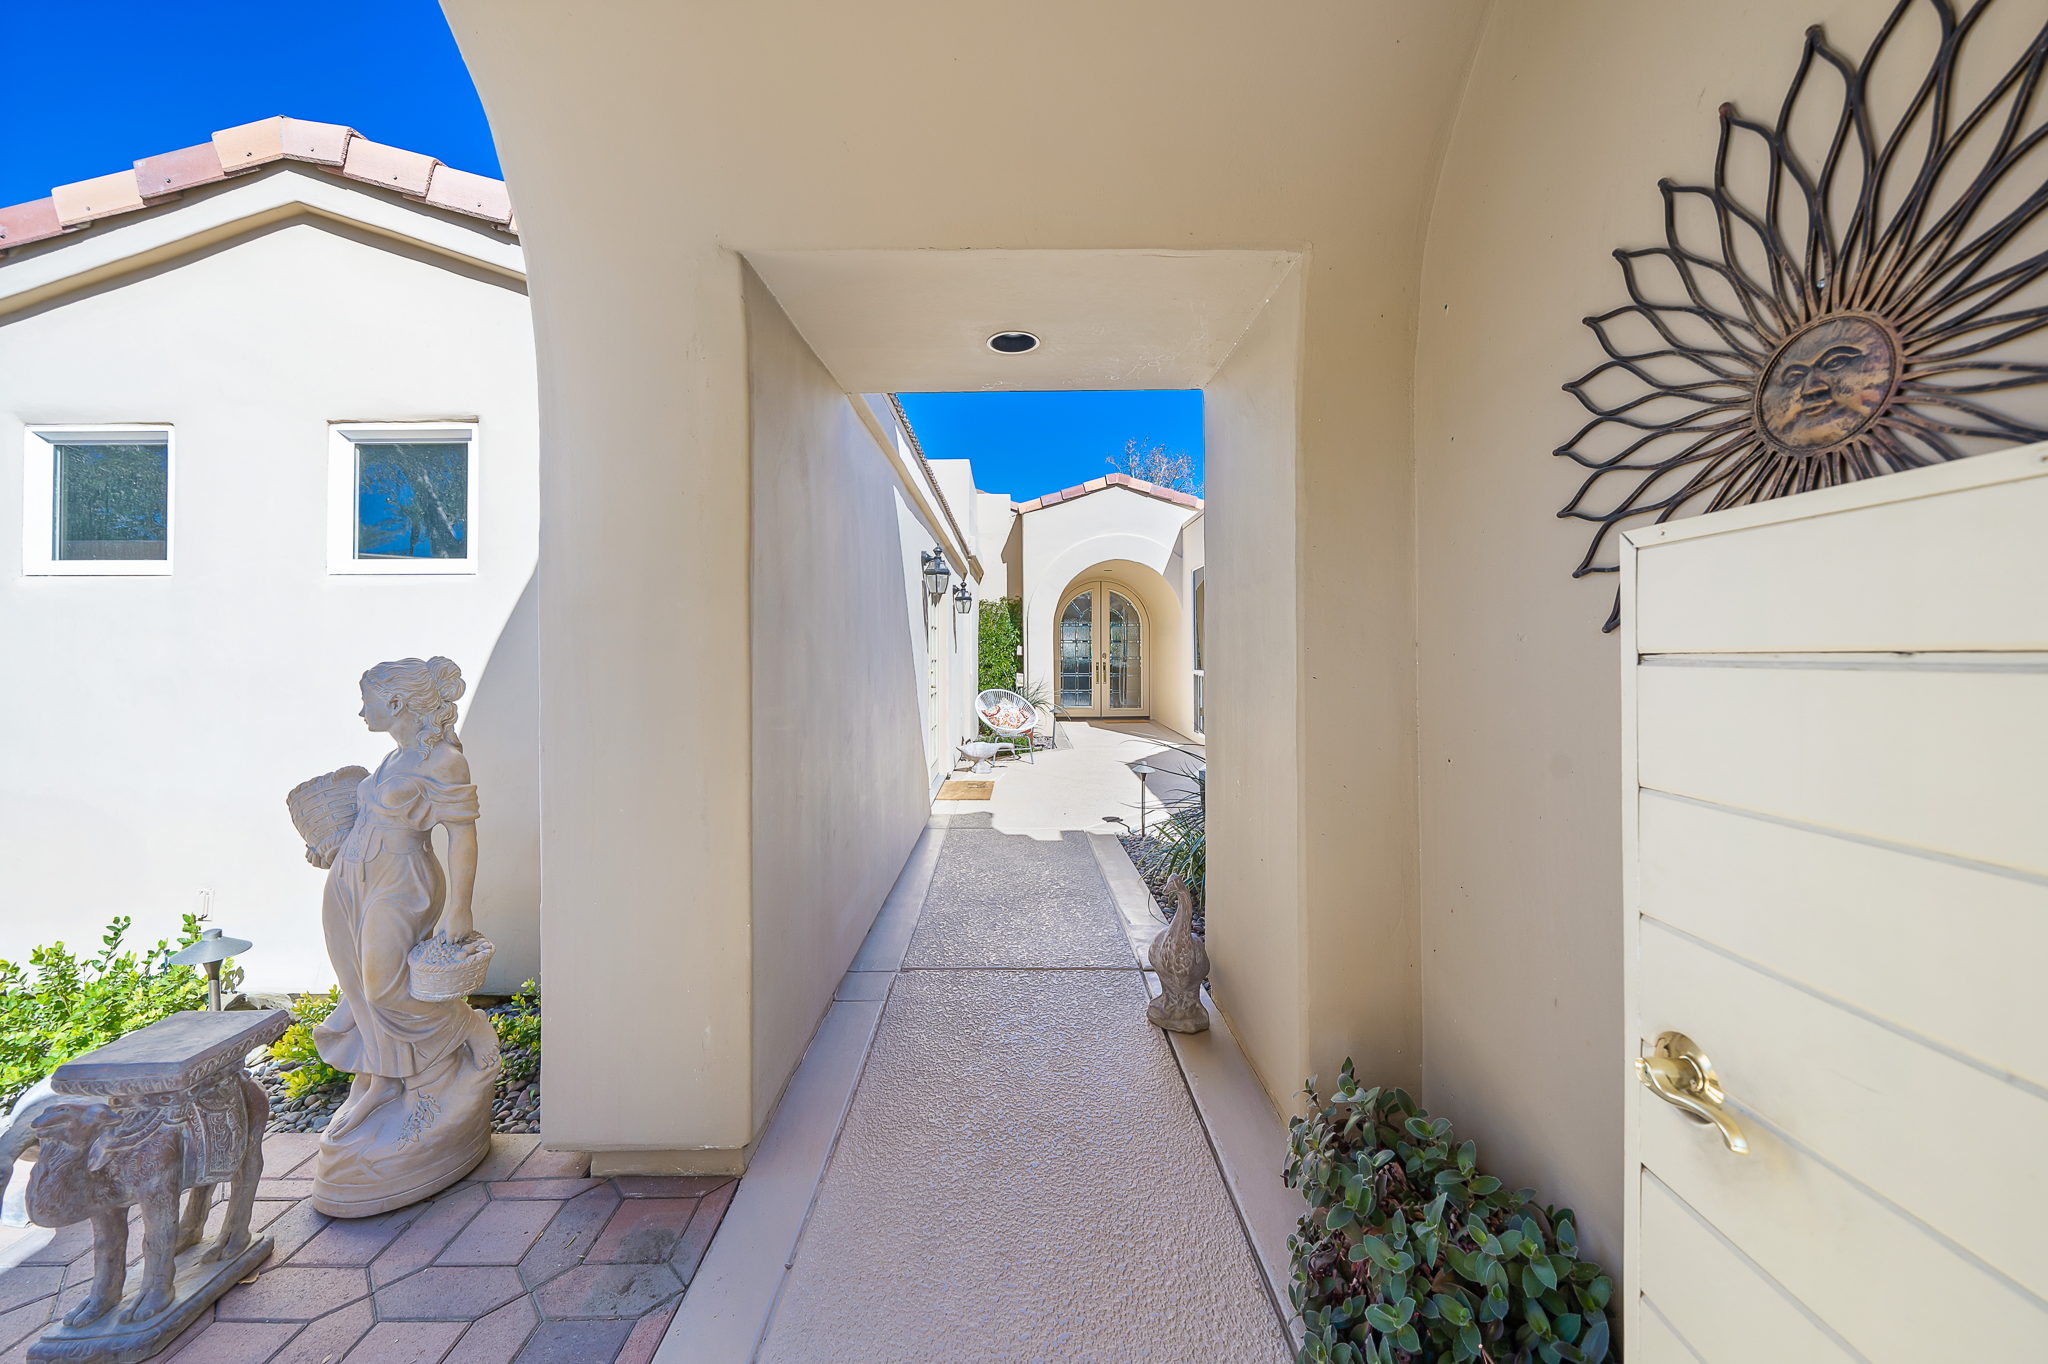 75436 Augusta Dr, Indian Wells, CA 92210, USA Photo 12